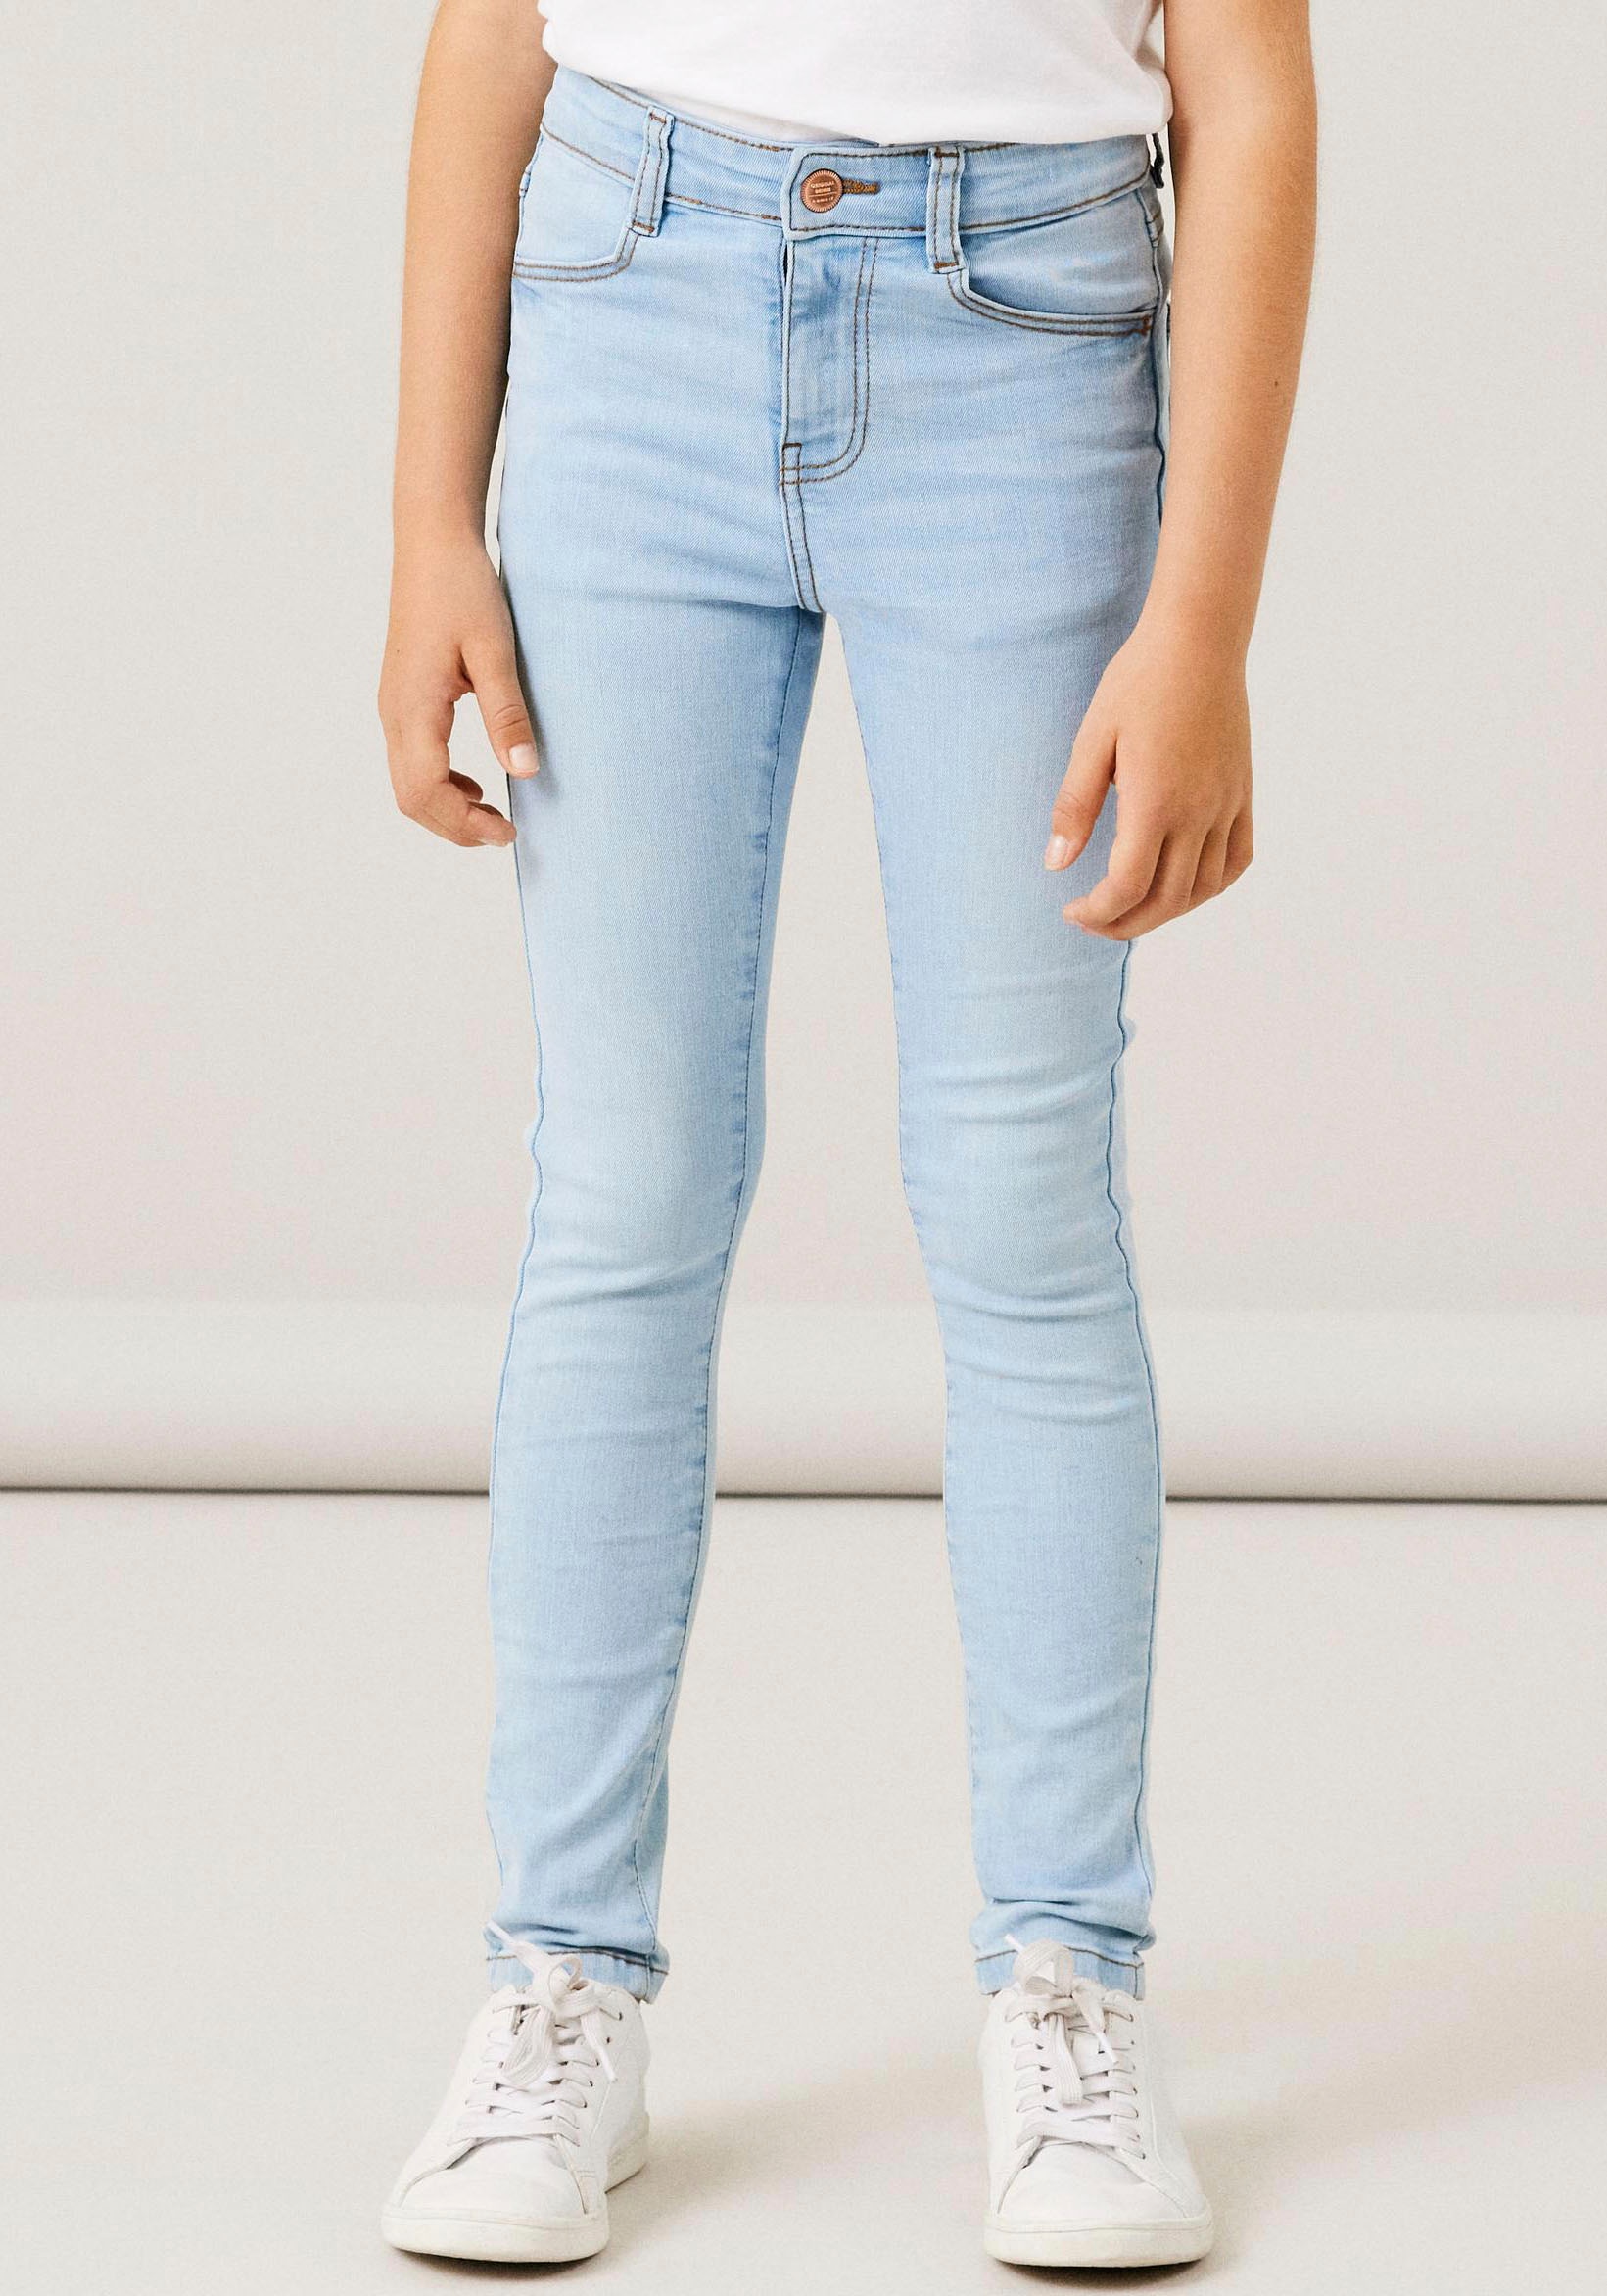 OTTO kaufen Stretch NOOS«, Name Skinny-fit-Jeans mit HW SKINNY »NKFPOLLY JEANS It bei 1180-ST